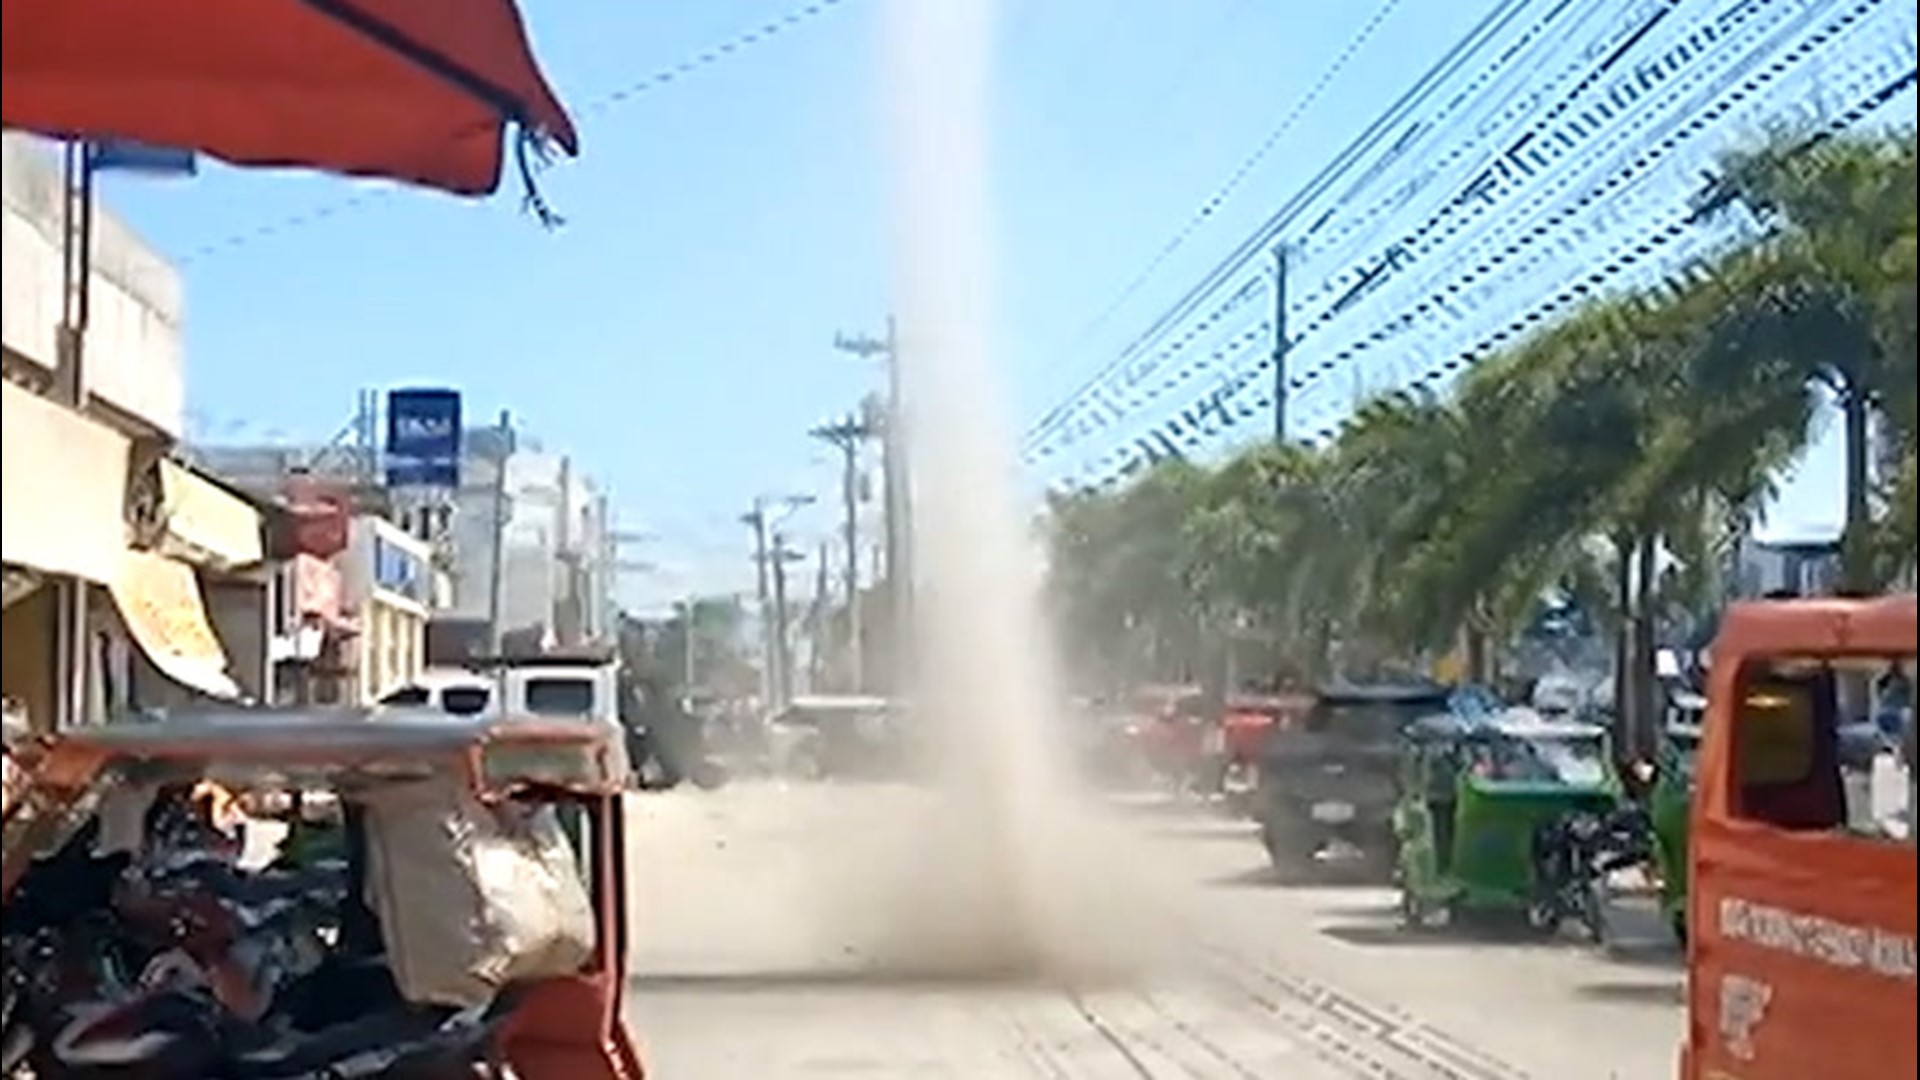 This dust devil was spotted over a busy road in Sultan Kudarat, Philippines, on March 3. It lasted for up to 10 minutes. It reportedly knocked over a taxi causing minor injuries to the people inside.